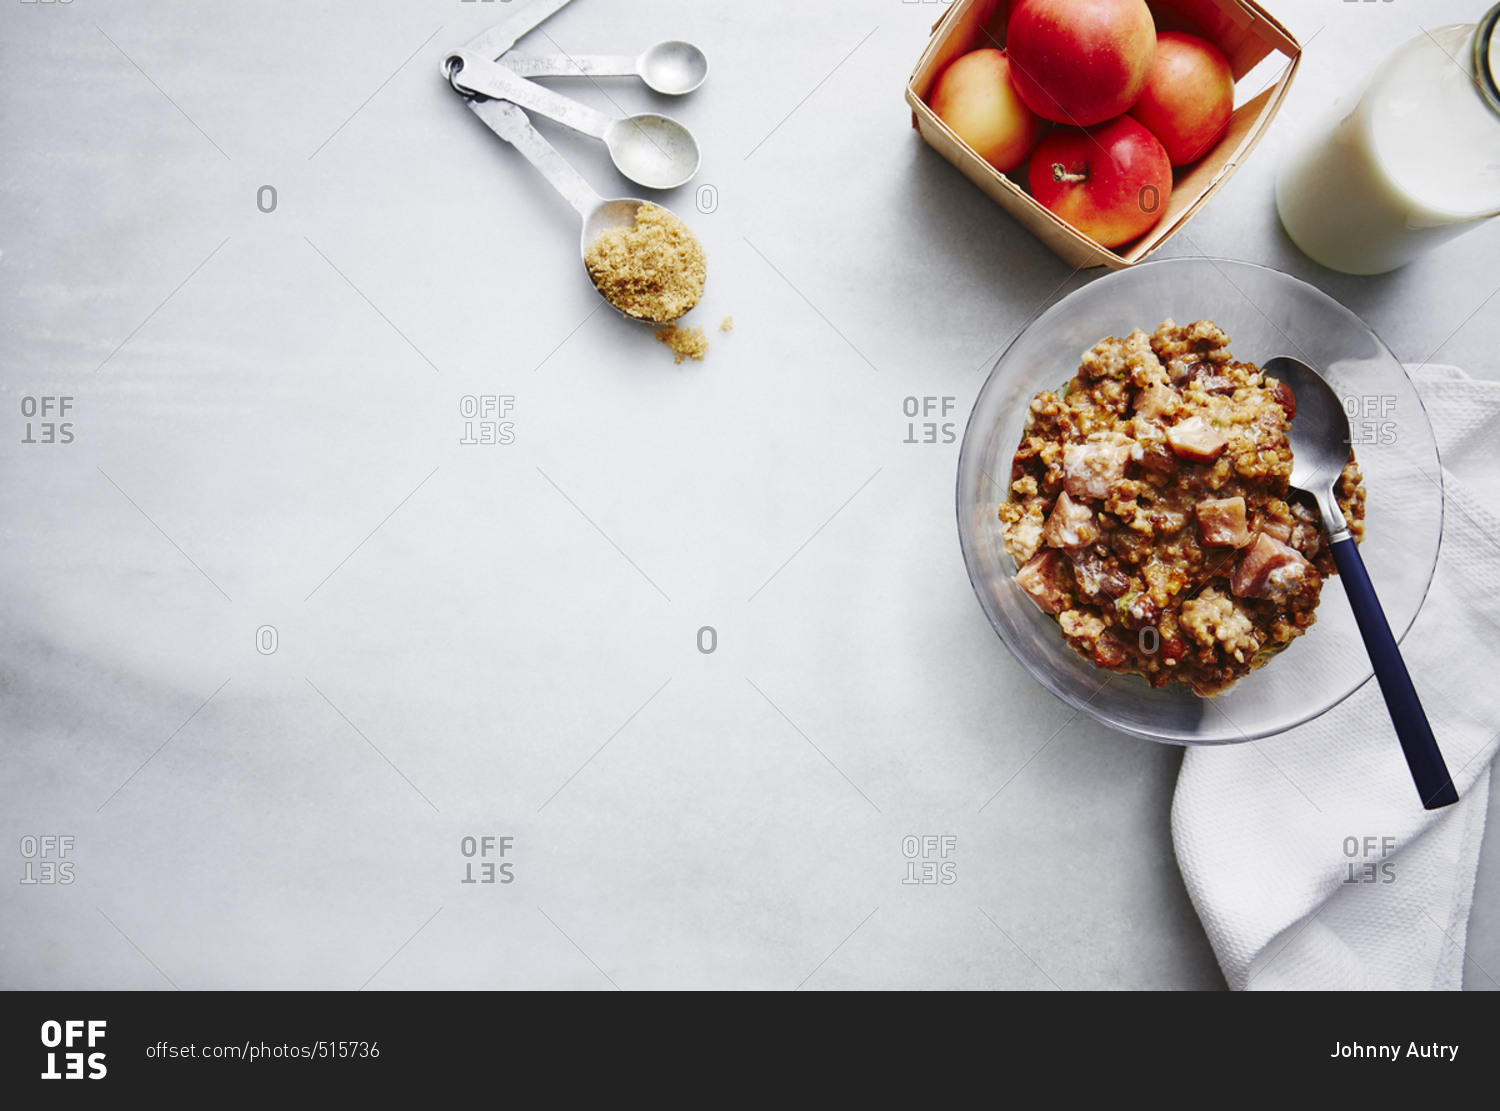 Oatmeal with diced apples and brown sugar